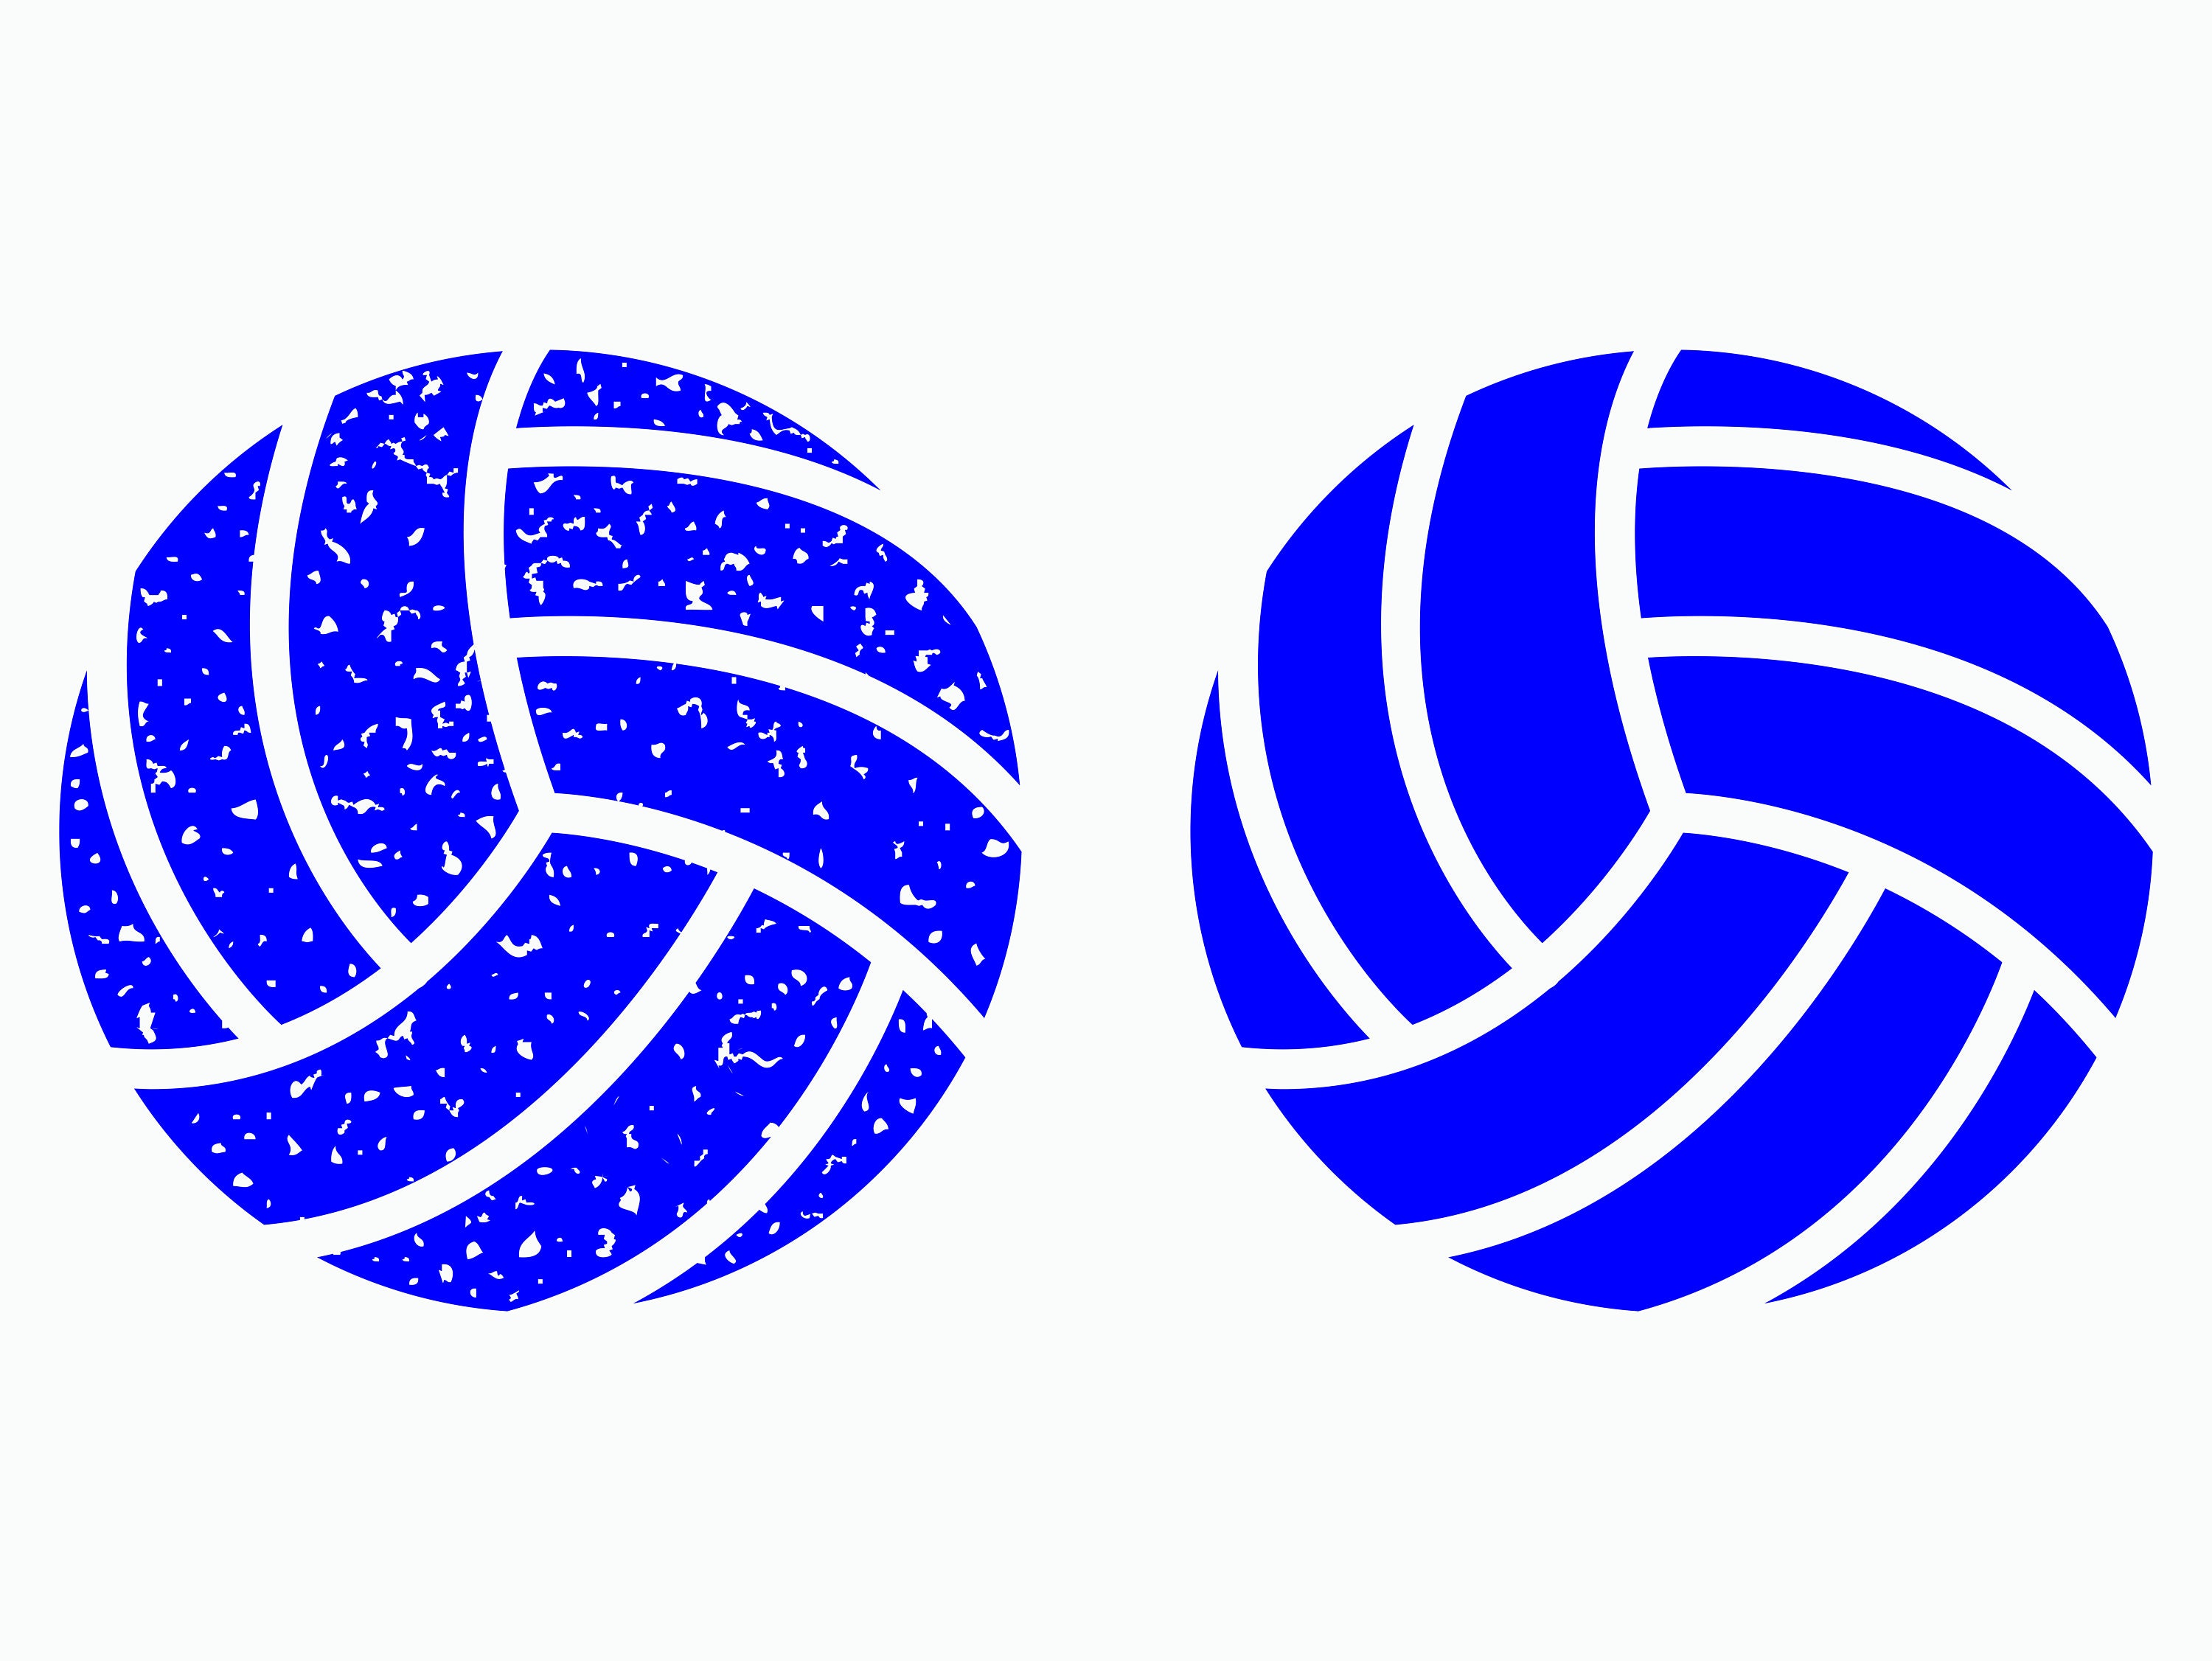 Blue Volleyball Clipart